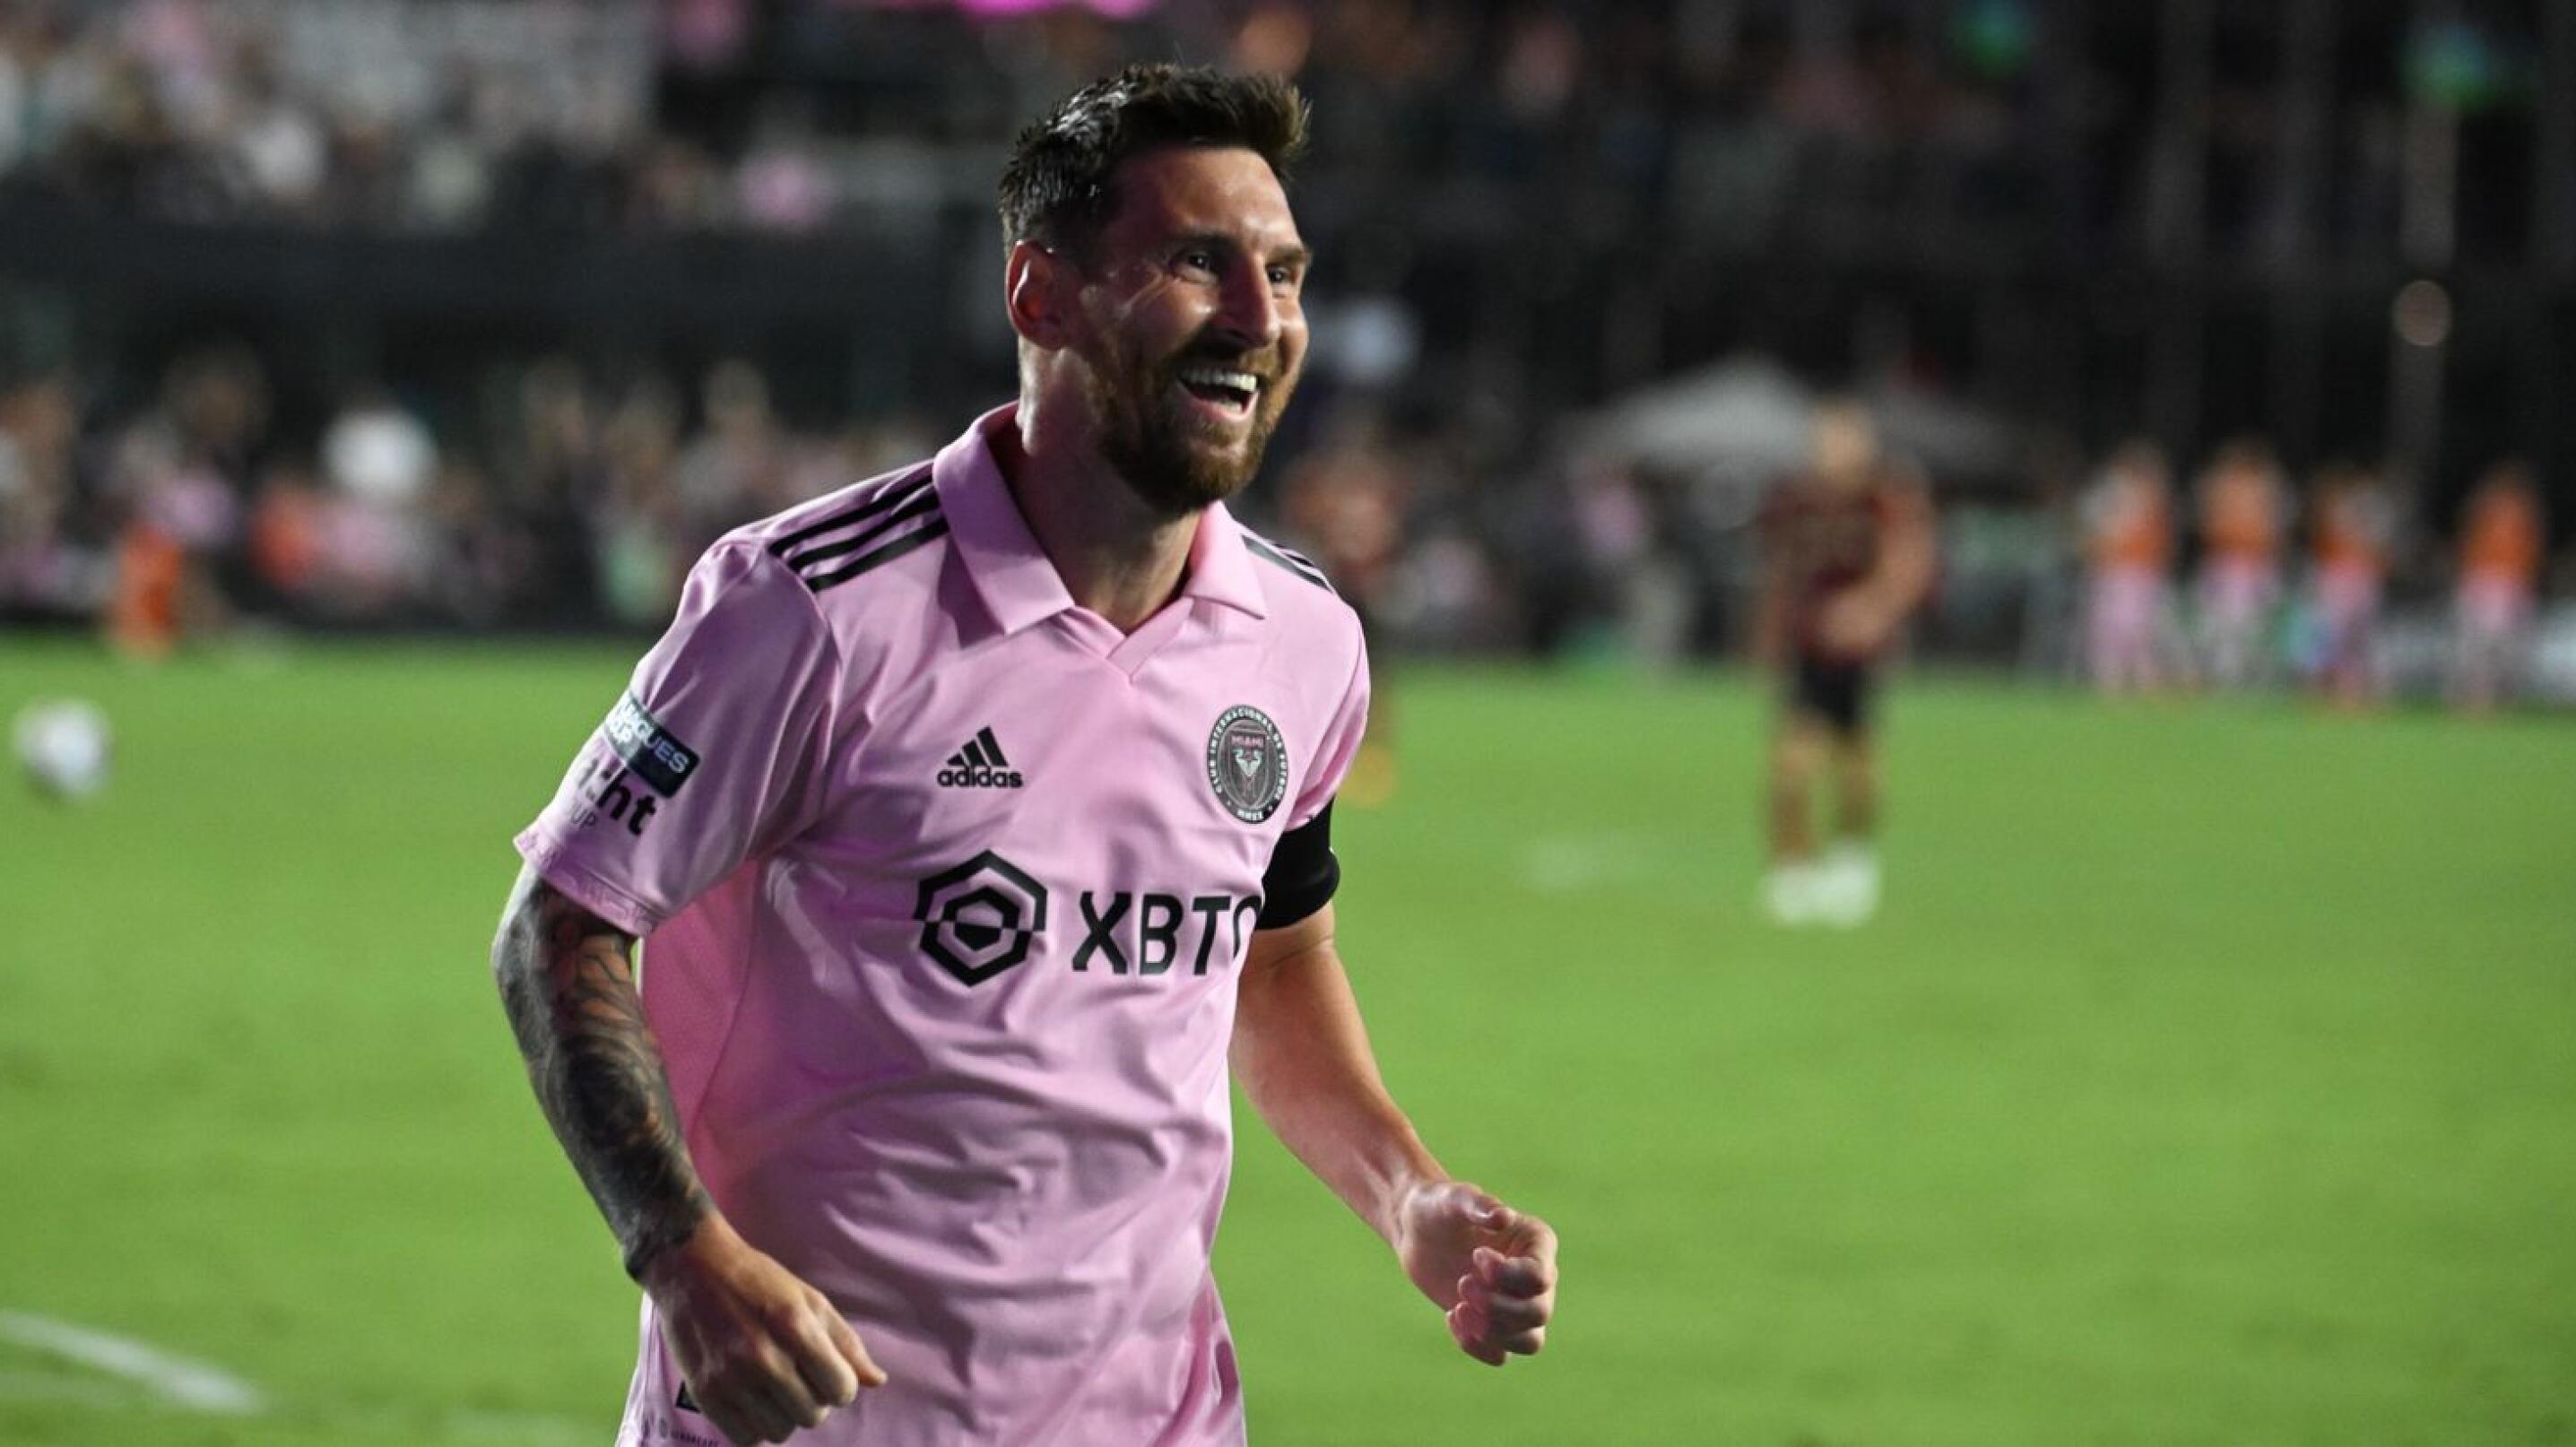 Inter Miami's Argentine forward Lionel Messi runs during the Leagues Cup football match between Inter Miami CF and Atlanta United FC at DRV PNK Stadium in Fort Lauderdale, Florida